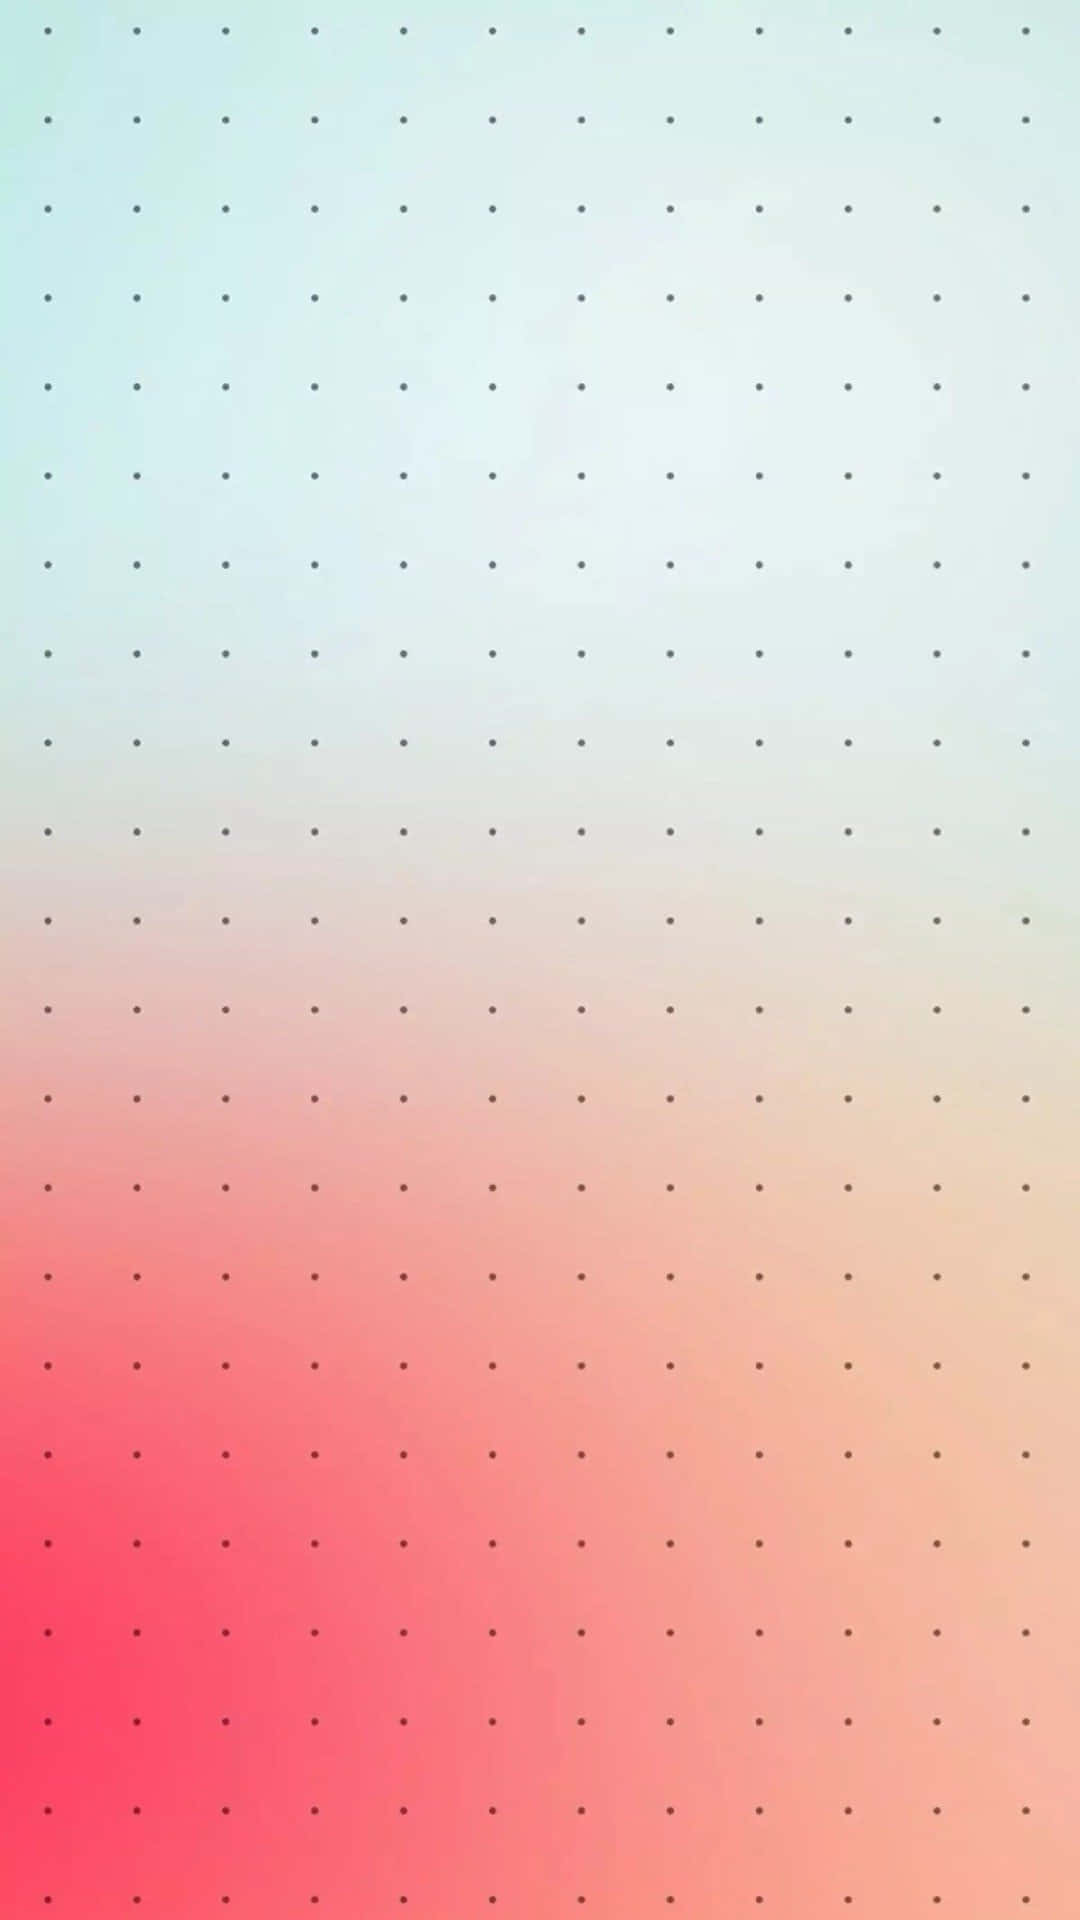 A Colorful Abstract Background With Dots Wallpaper